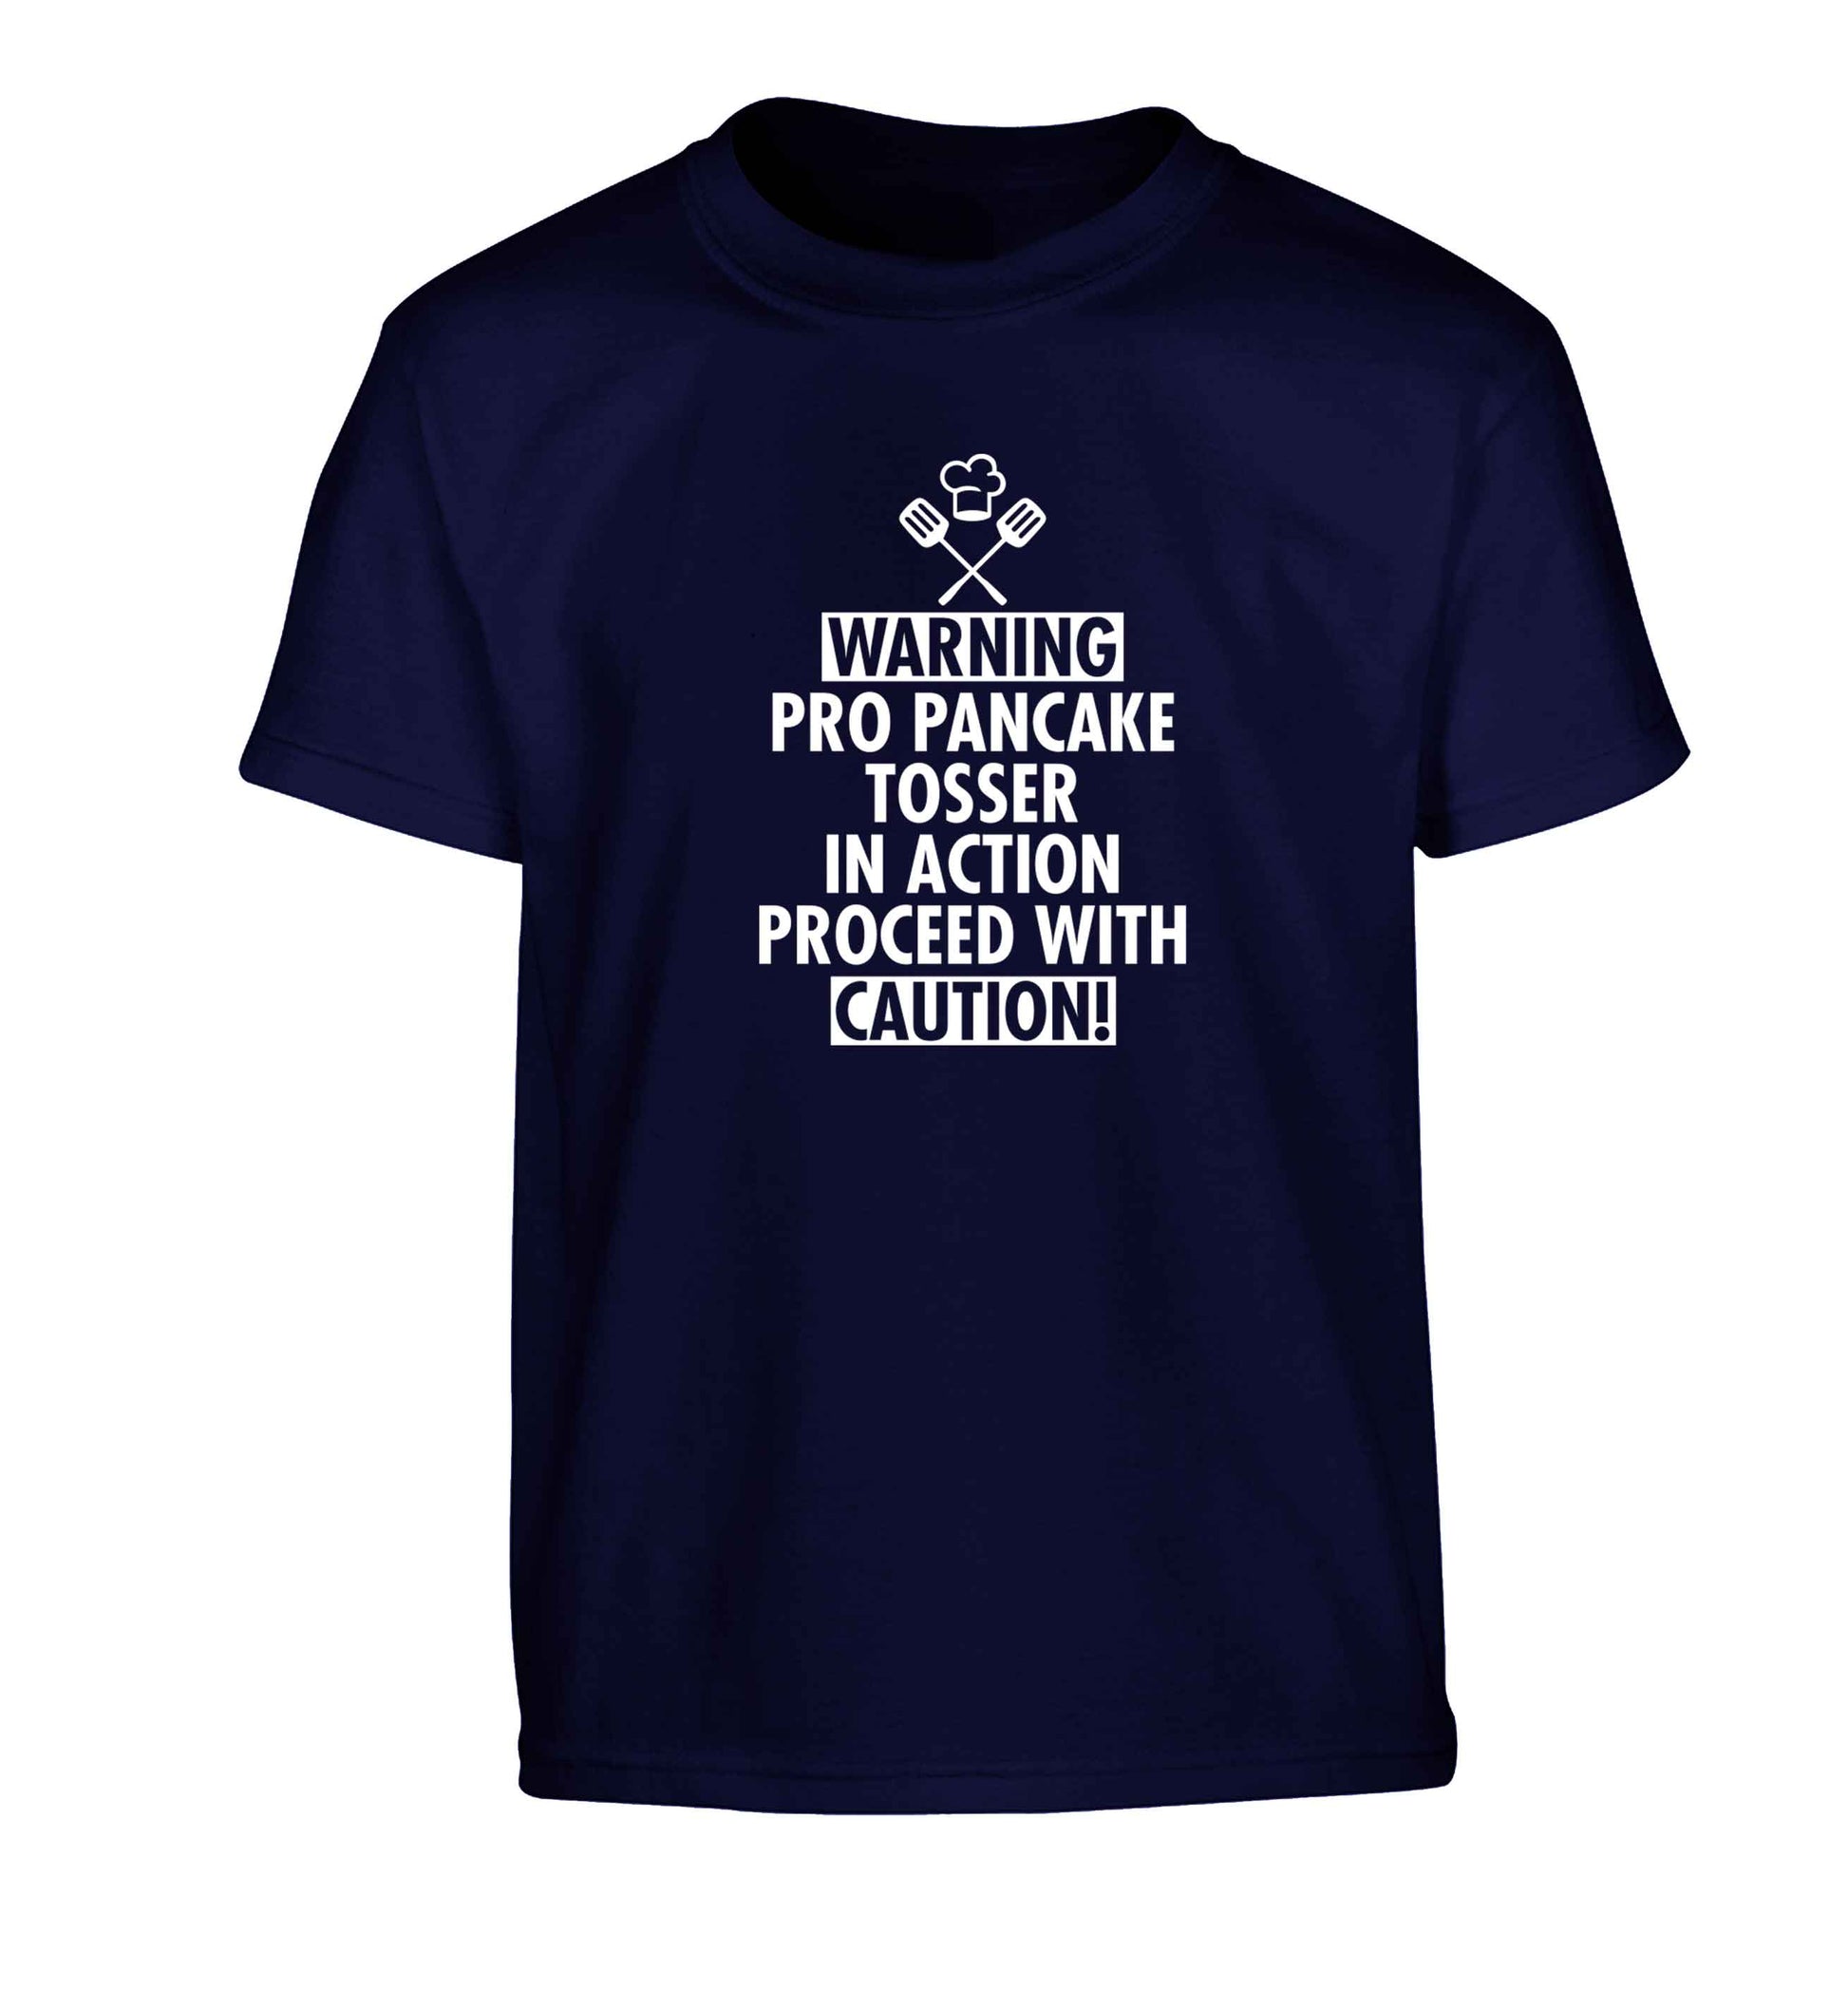 Warning pro pancake tosser in action proceed with caution Children's navy Tshirt 12-13 Years